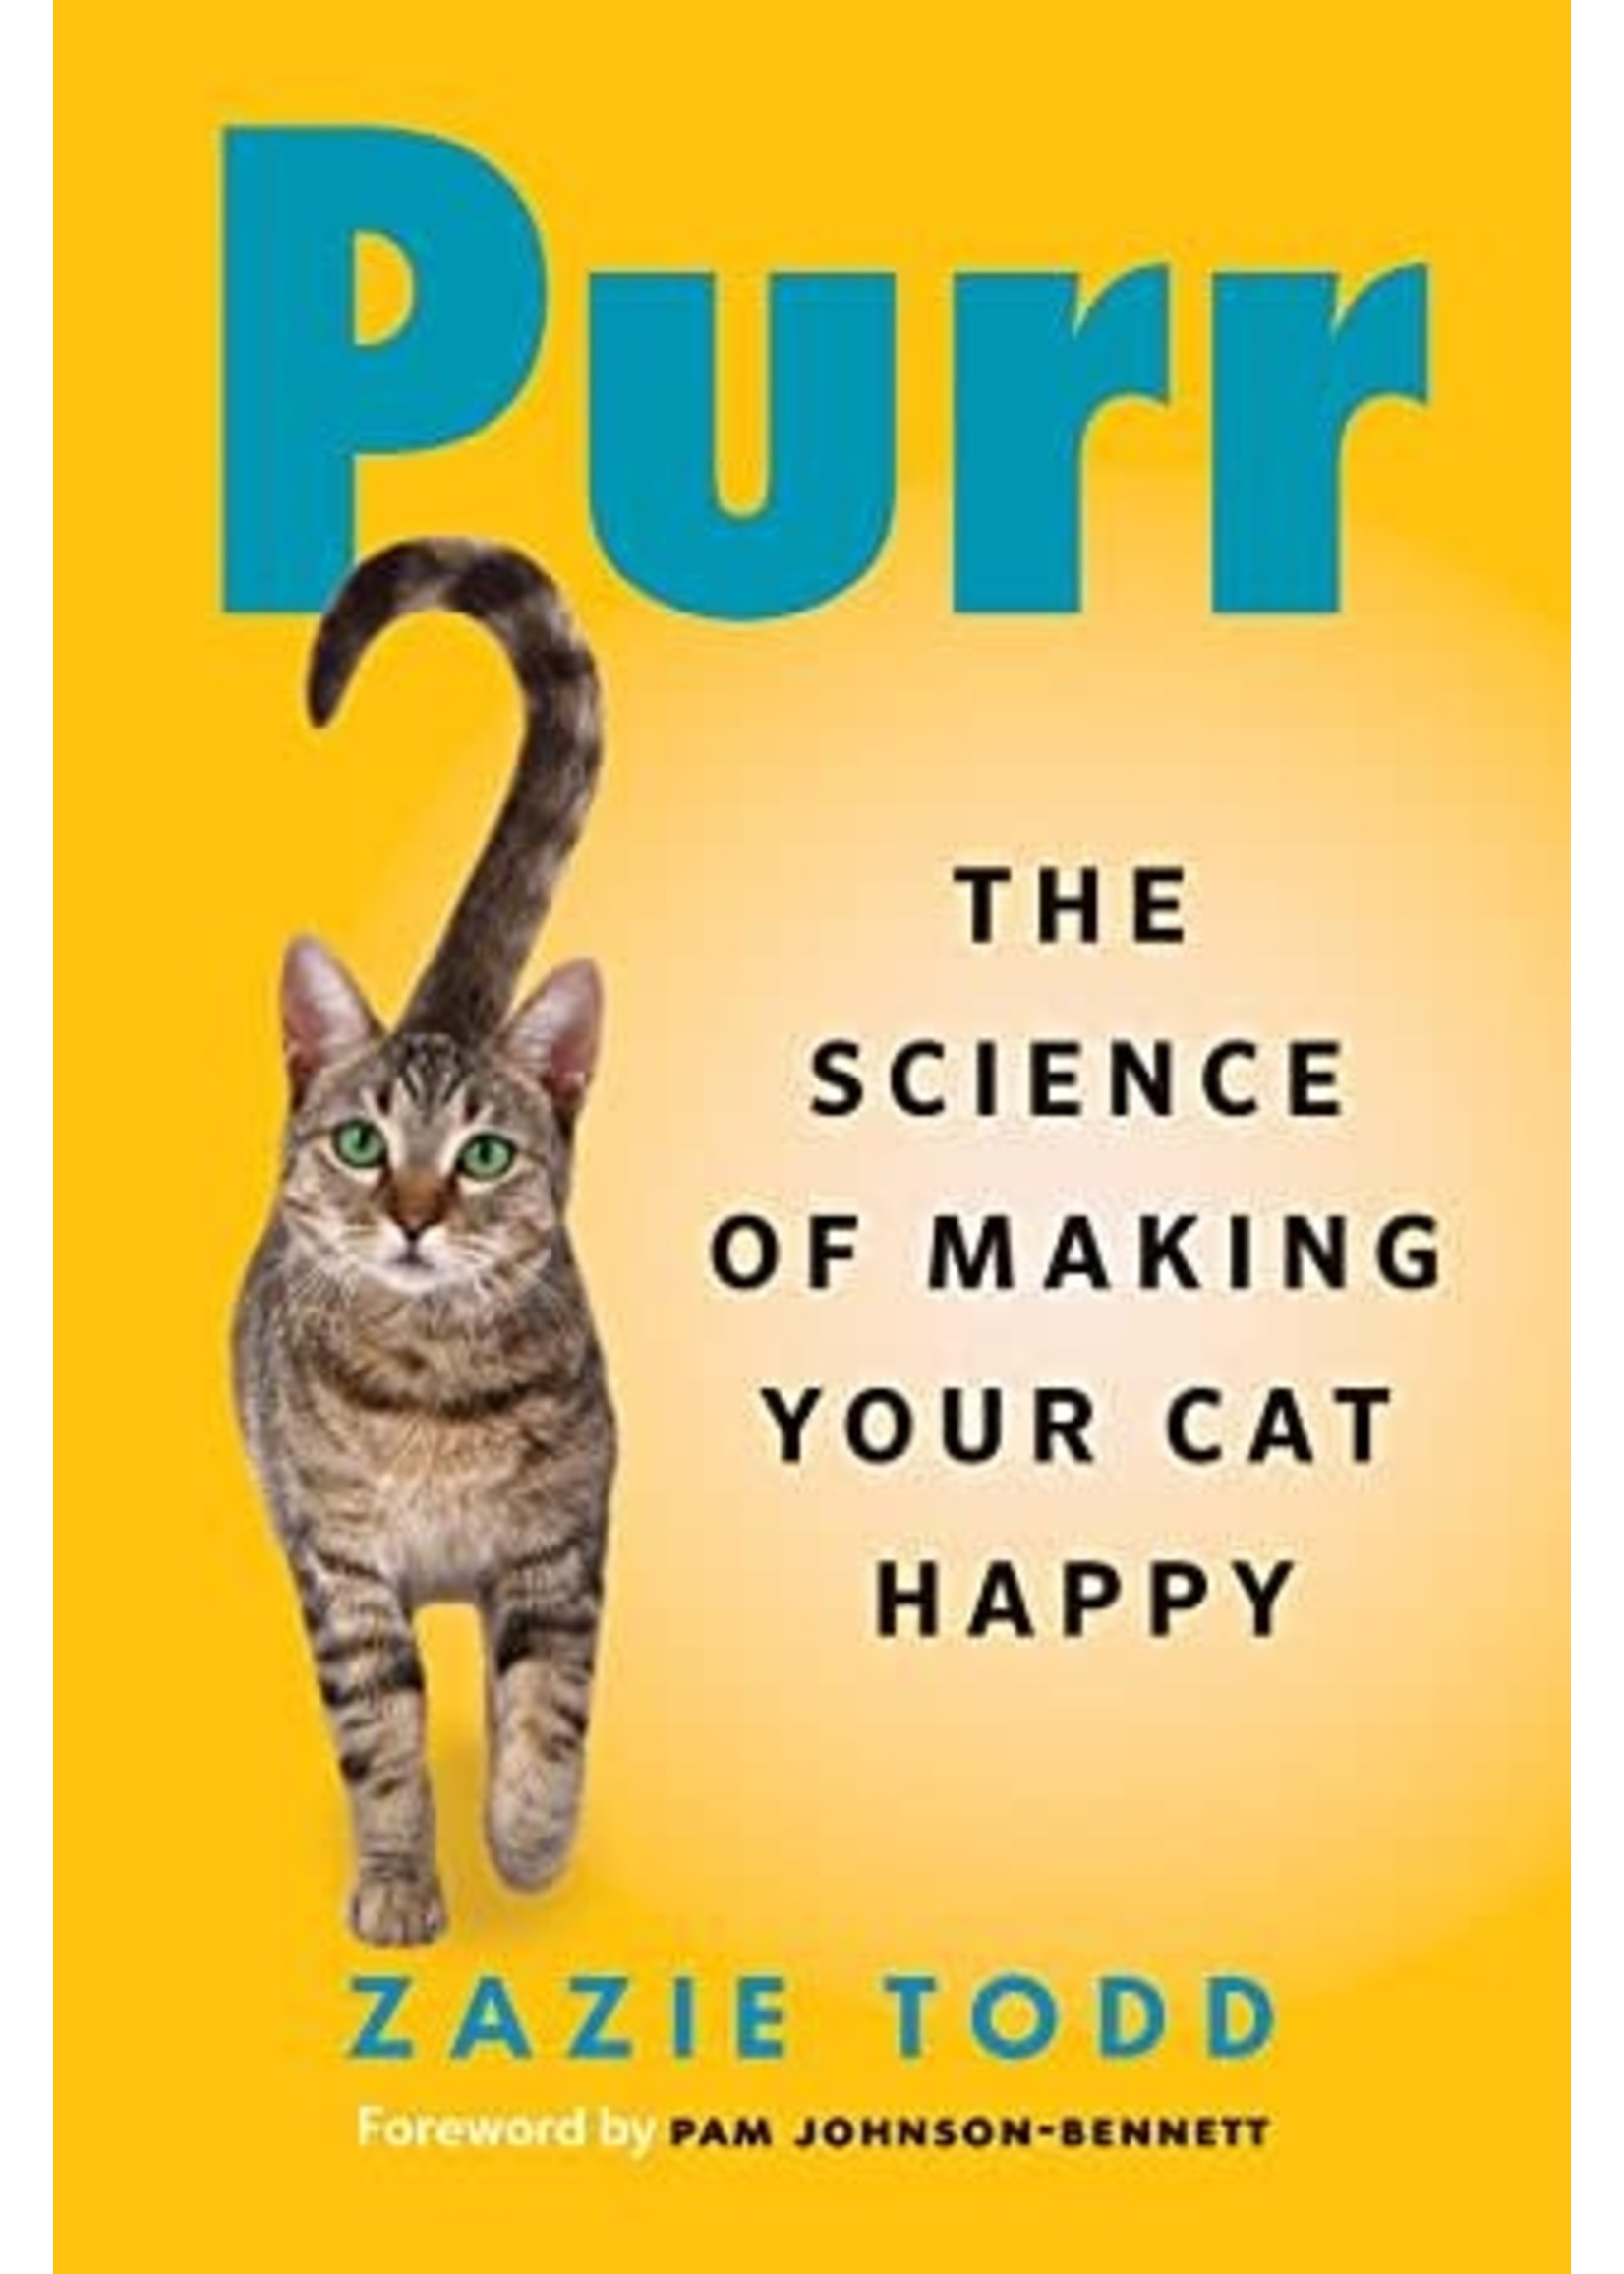 Purr: The Science of Making Your Cat Happy by Zazie Todd